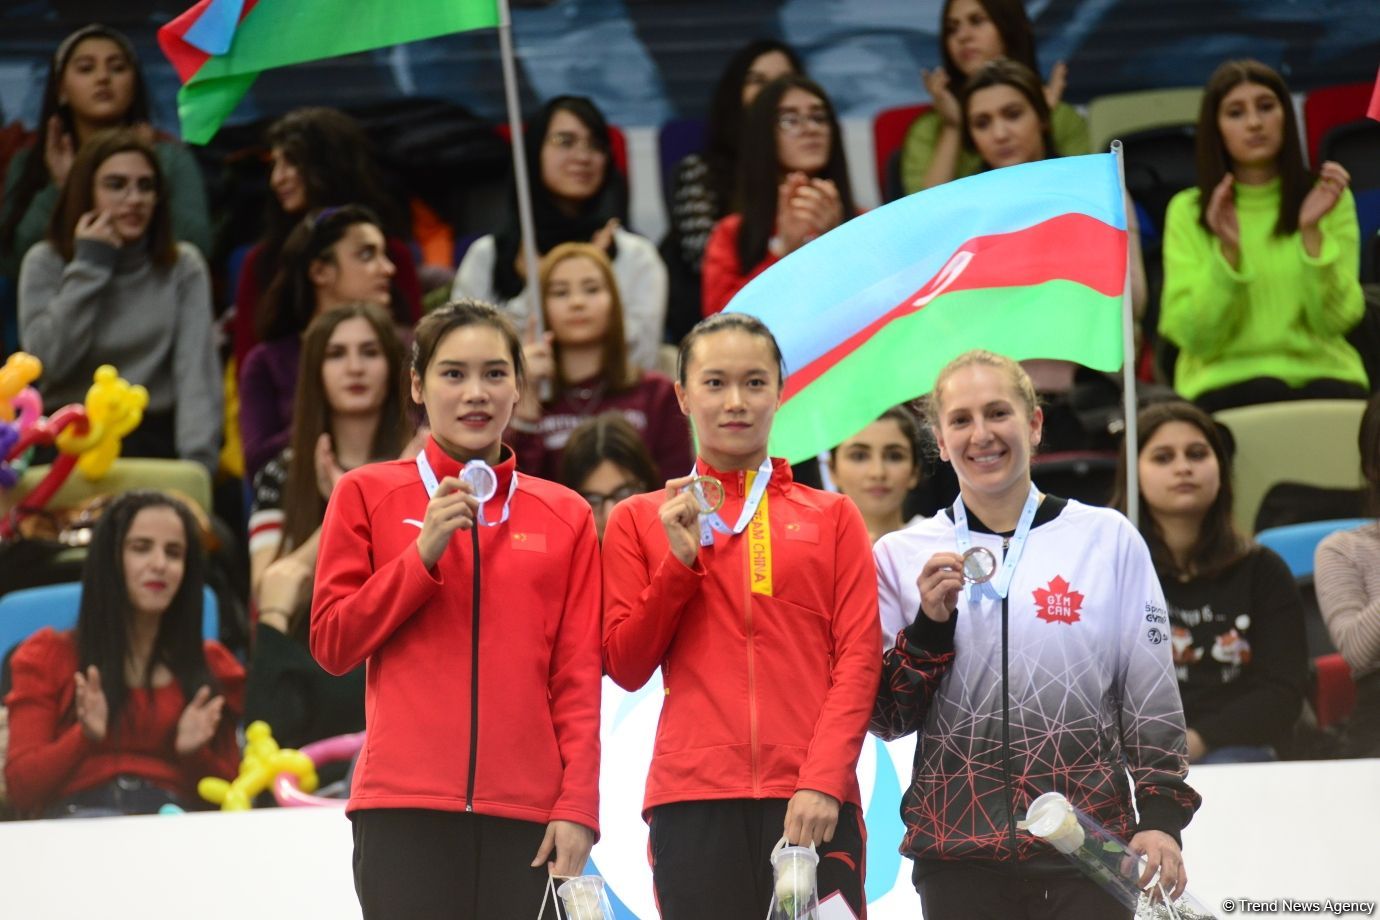 Awarding ceremony for winners of individual program at FIG World Cup in Trampoline Gymnastics & Tumbling held in Baku (PHOTO)